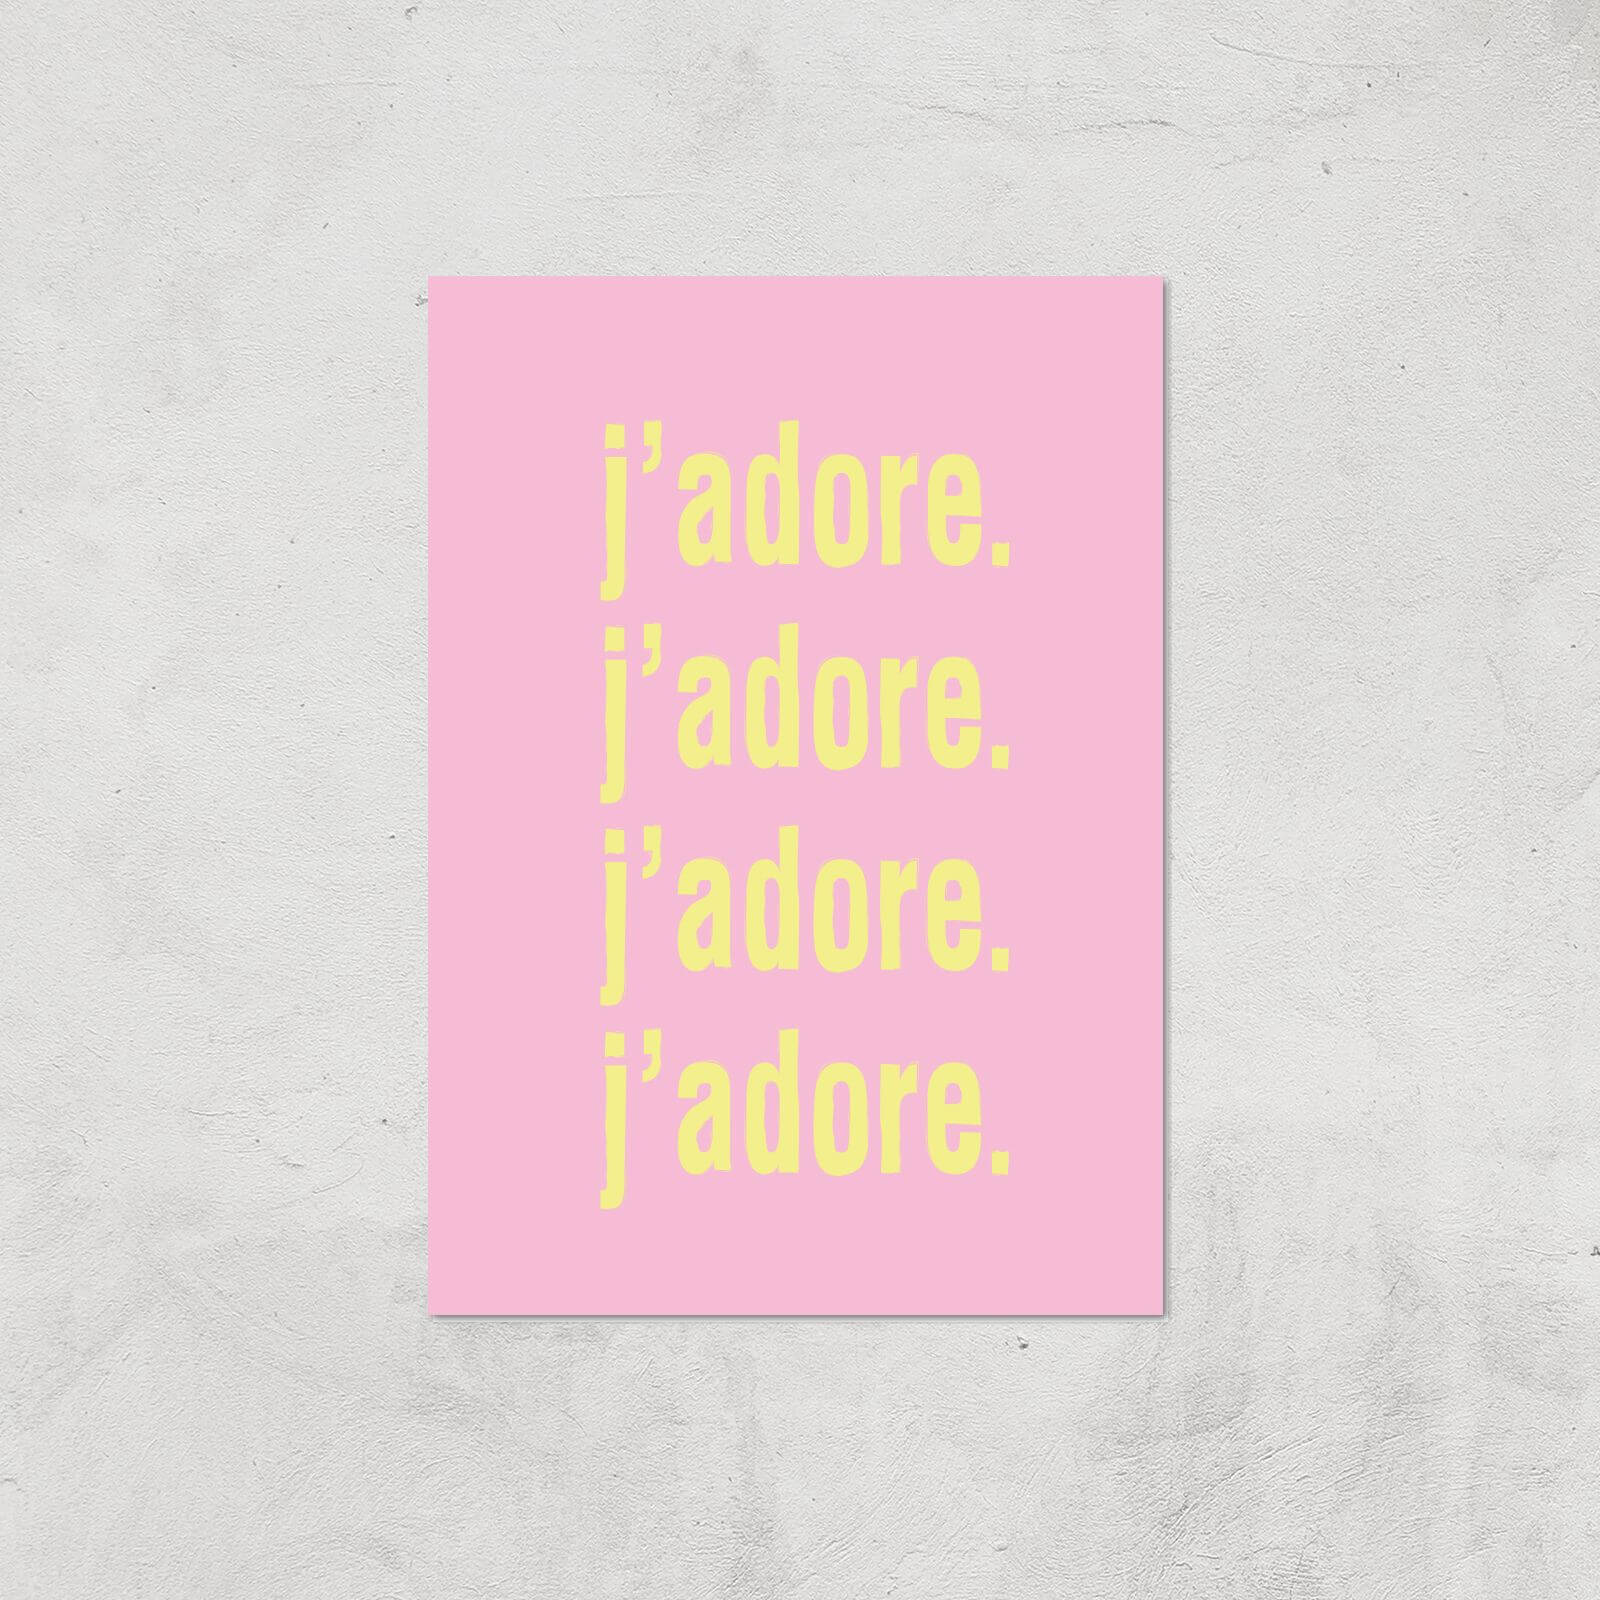 J'adore J'adore J'adore J'adore Giclee Art Print - A2 - Print Only